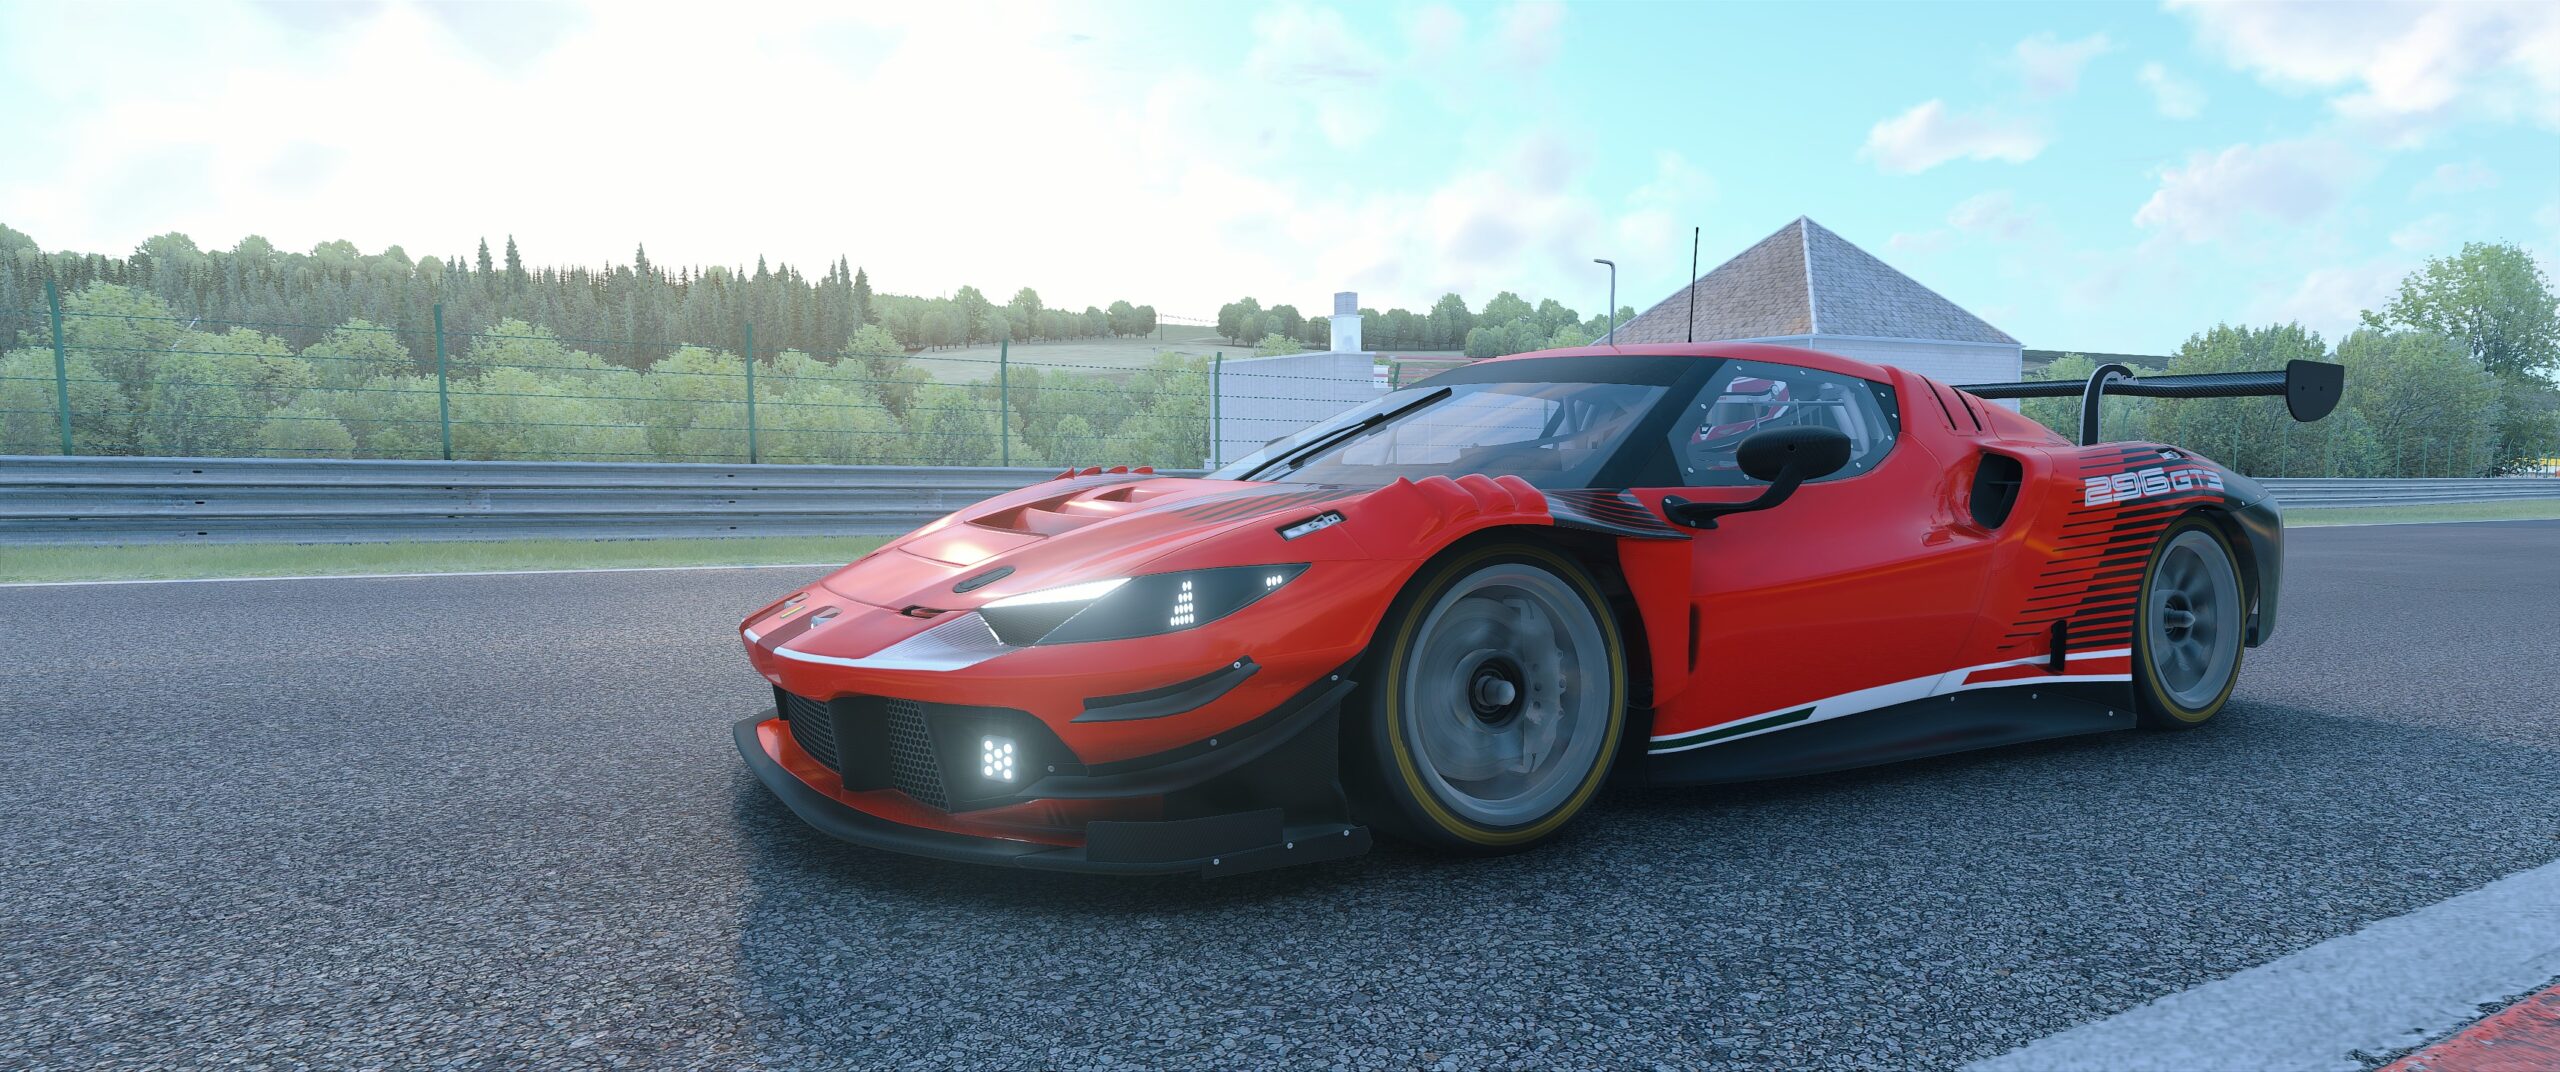 Assetto Corsa Cars Mods - Driving & Racing Games 